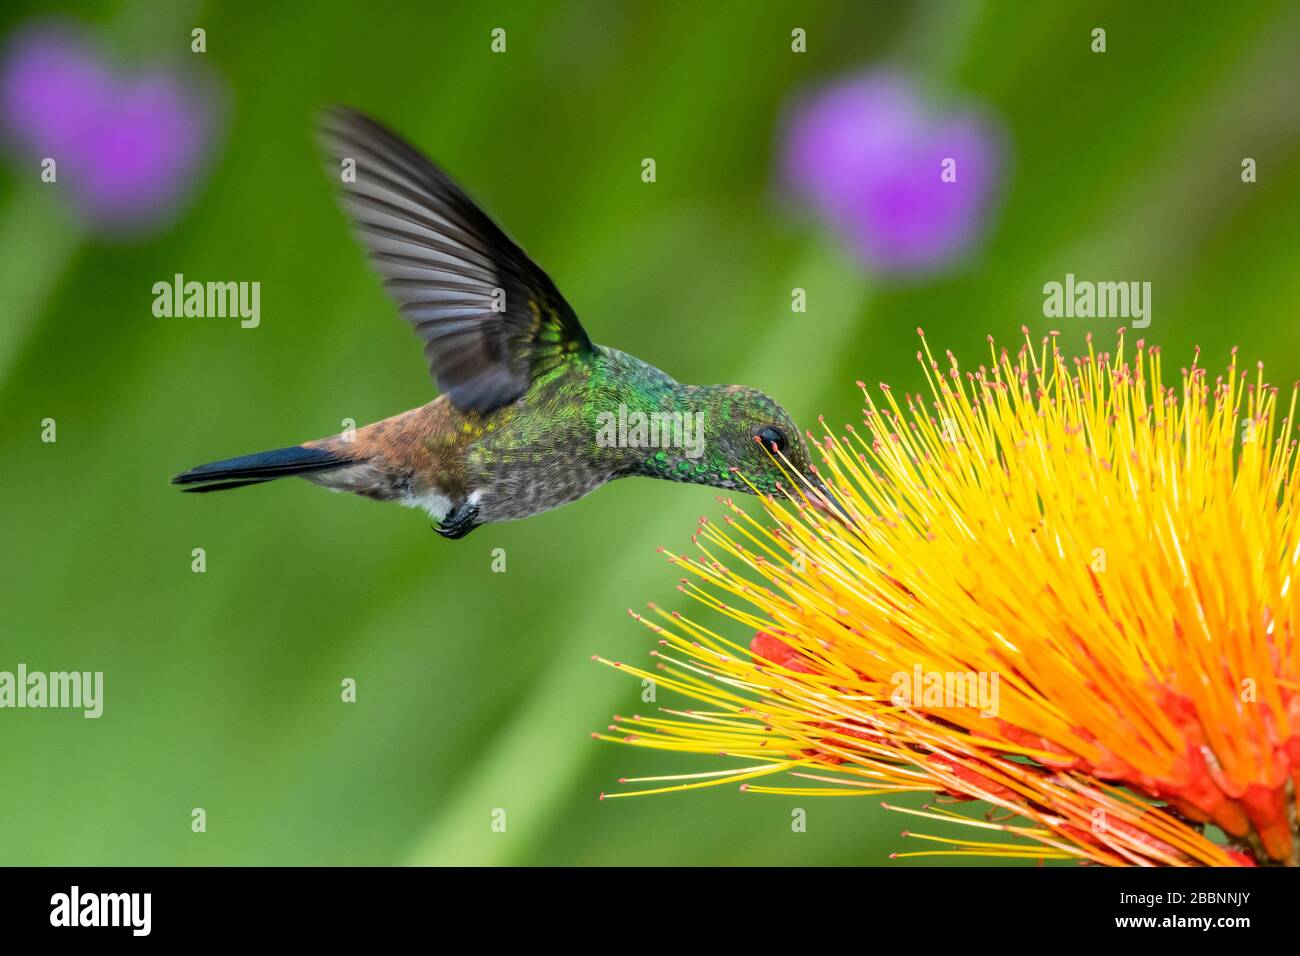 A juvenile Copper-rumped hummingbird feeding on the exotic Combretum (fire plant) flower with flowers blurred in the background. Stock Photo